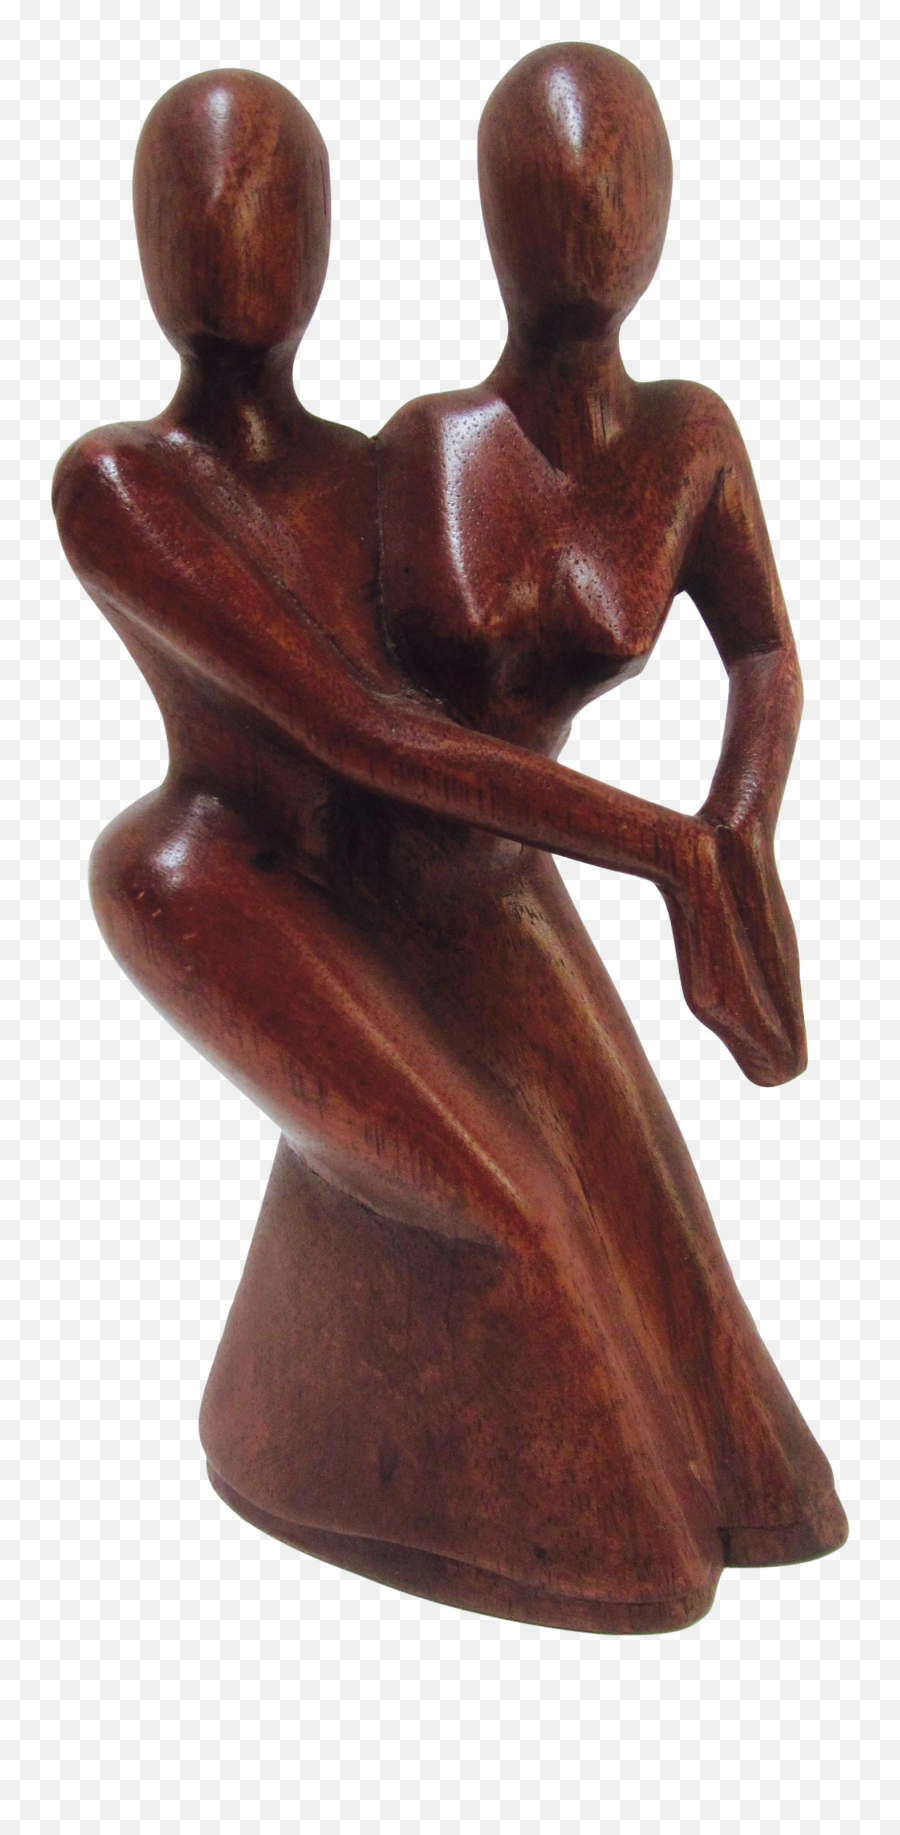 Embracing Lovers Statue Png - Wood Carving,Statue Png